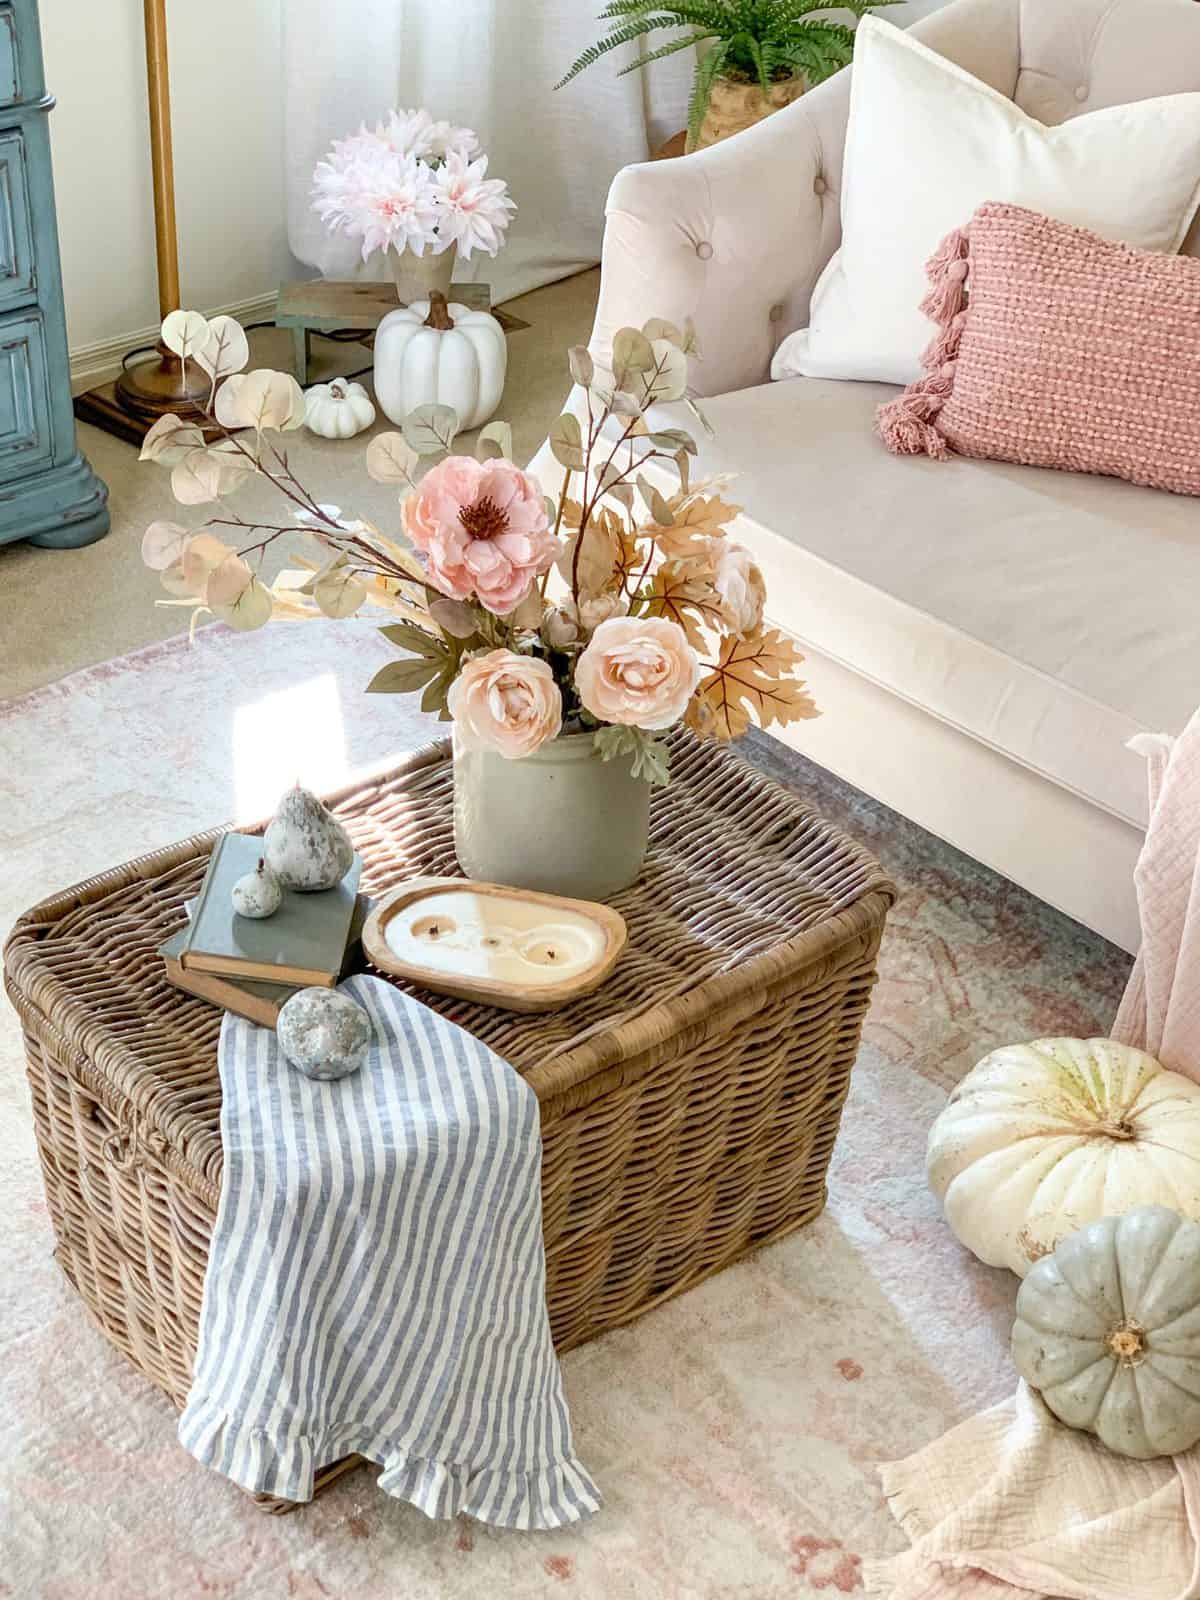 Coffee table decor on top of a lidded basket in a living room.